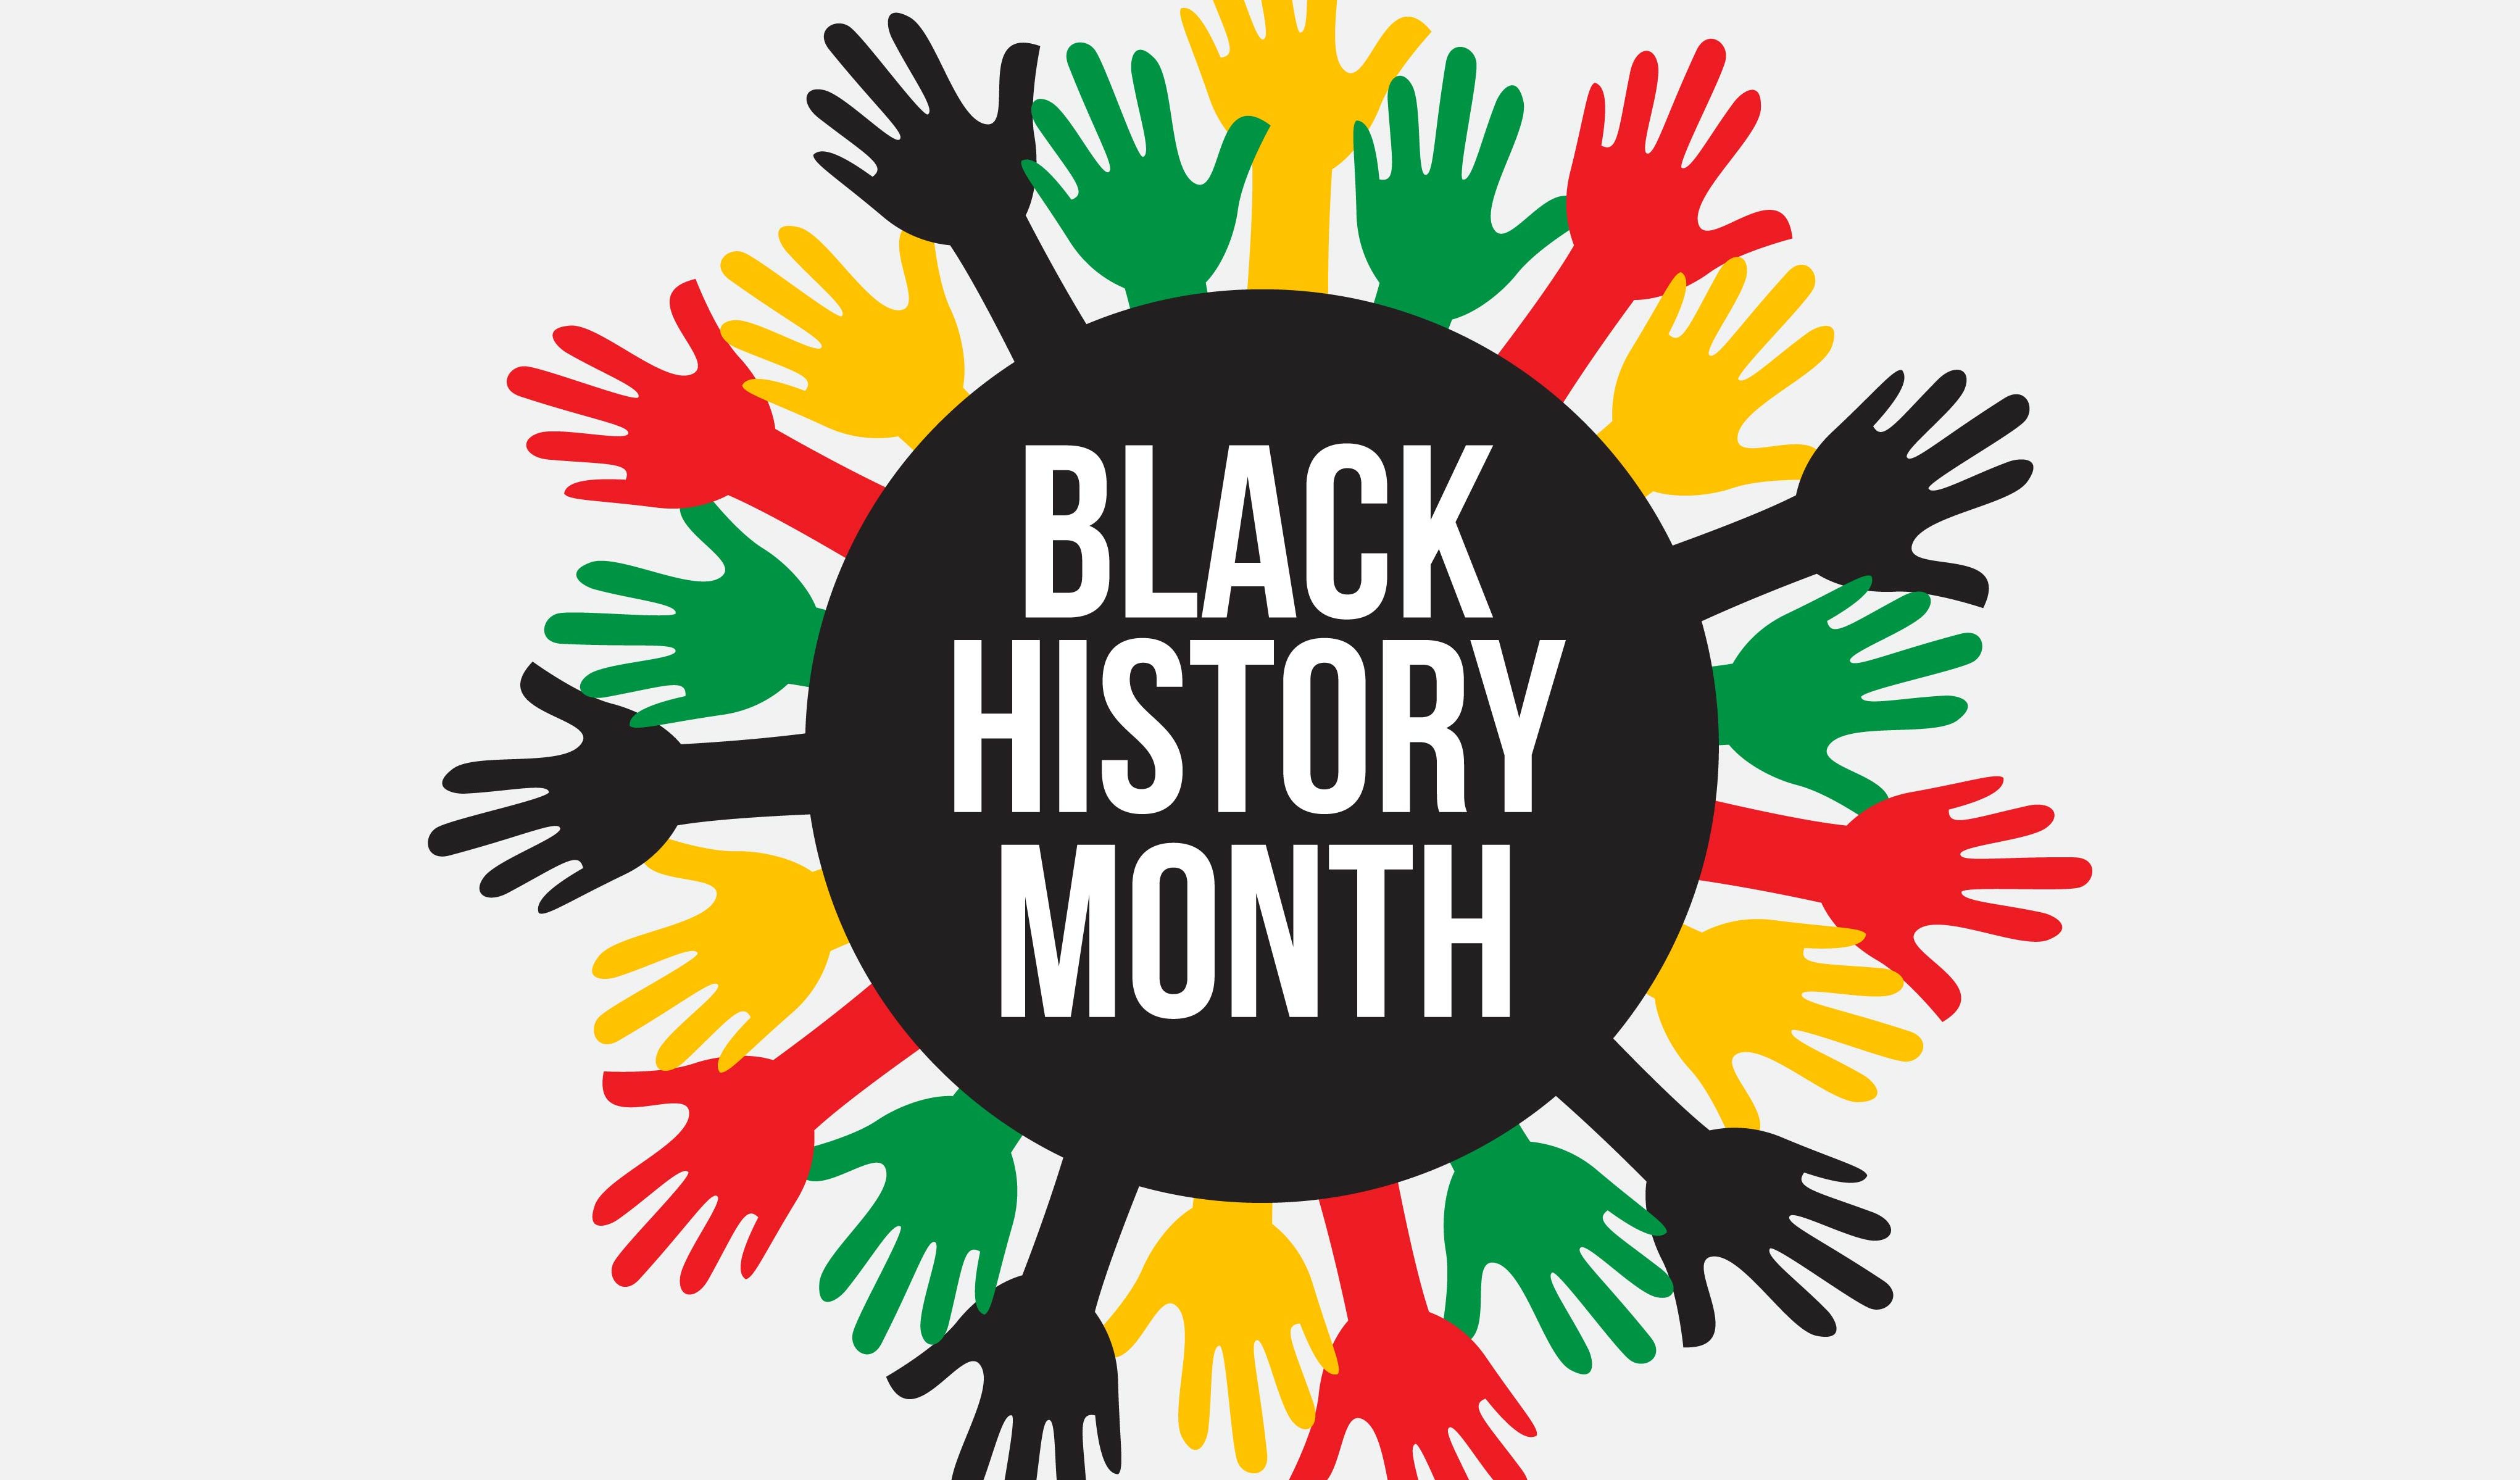 Celebrating Black writers and books as part of Black History Month 2019